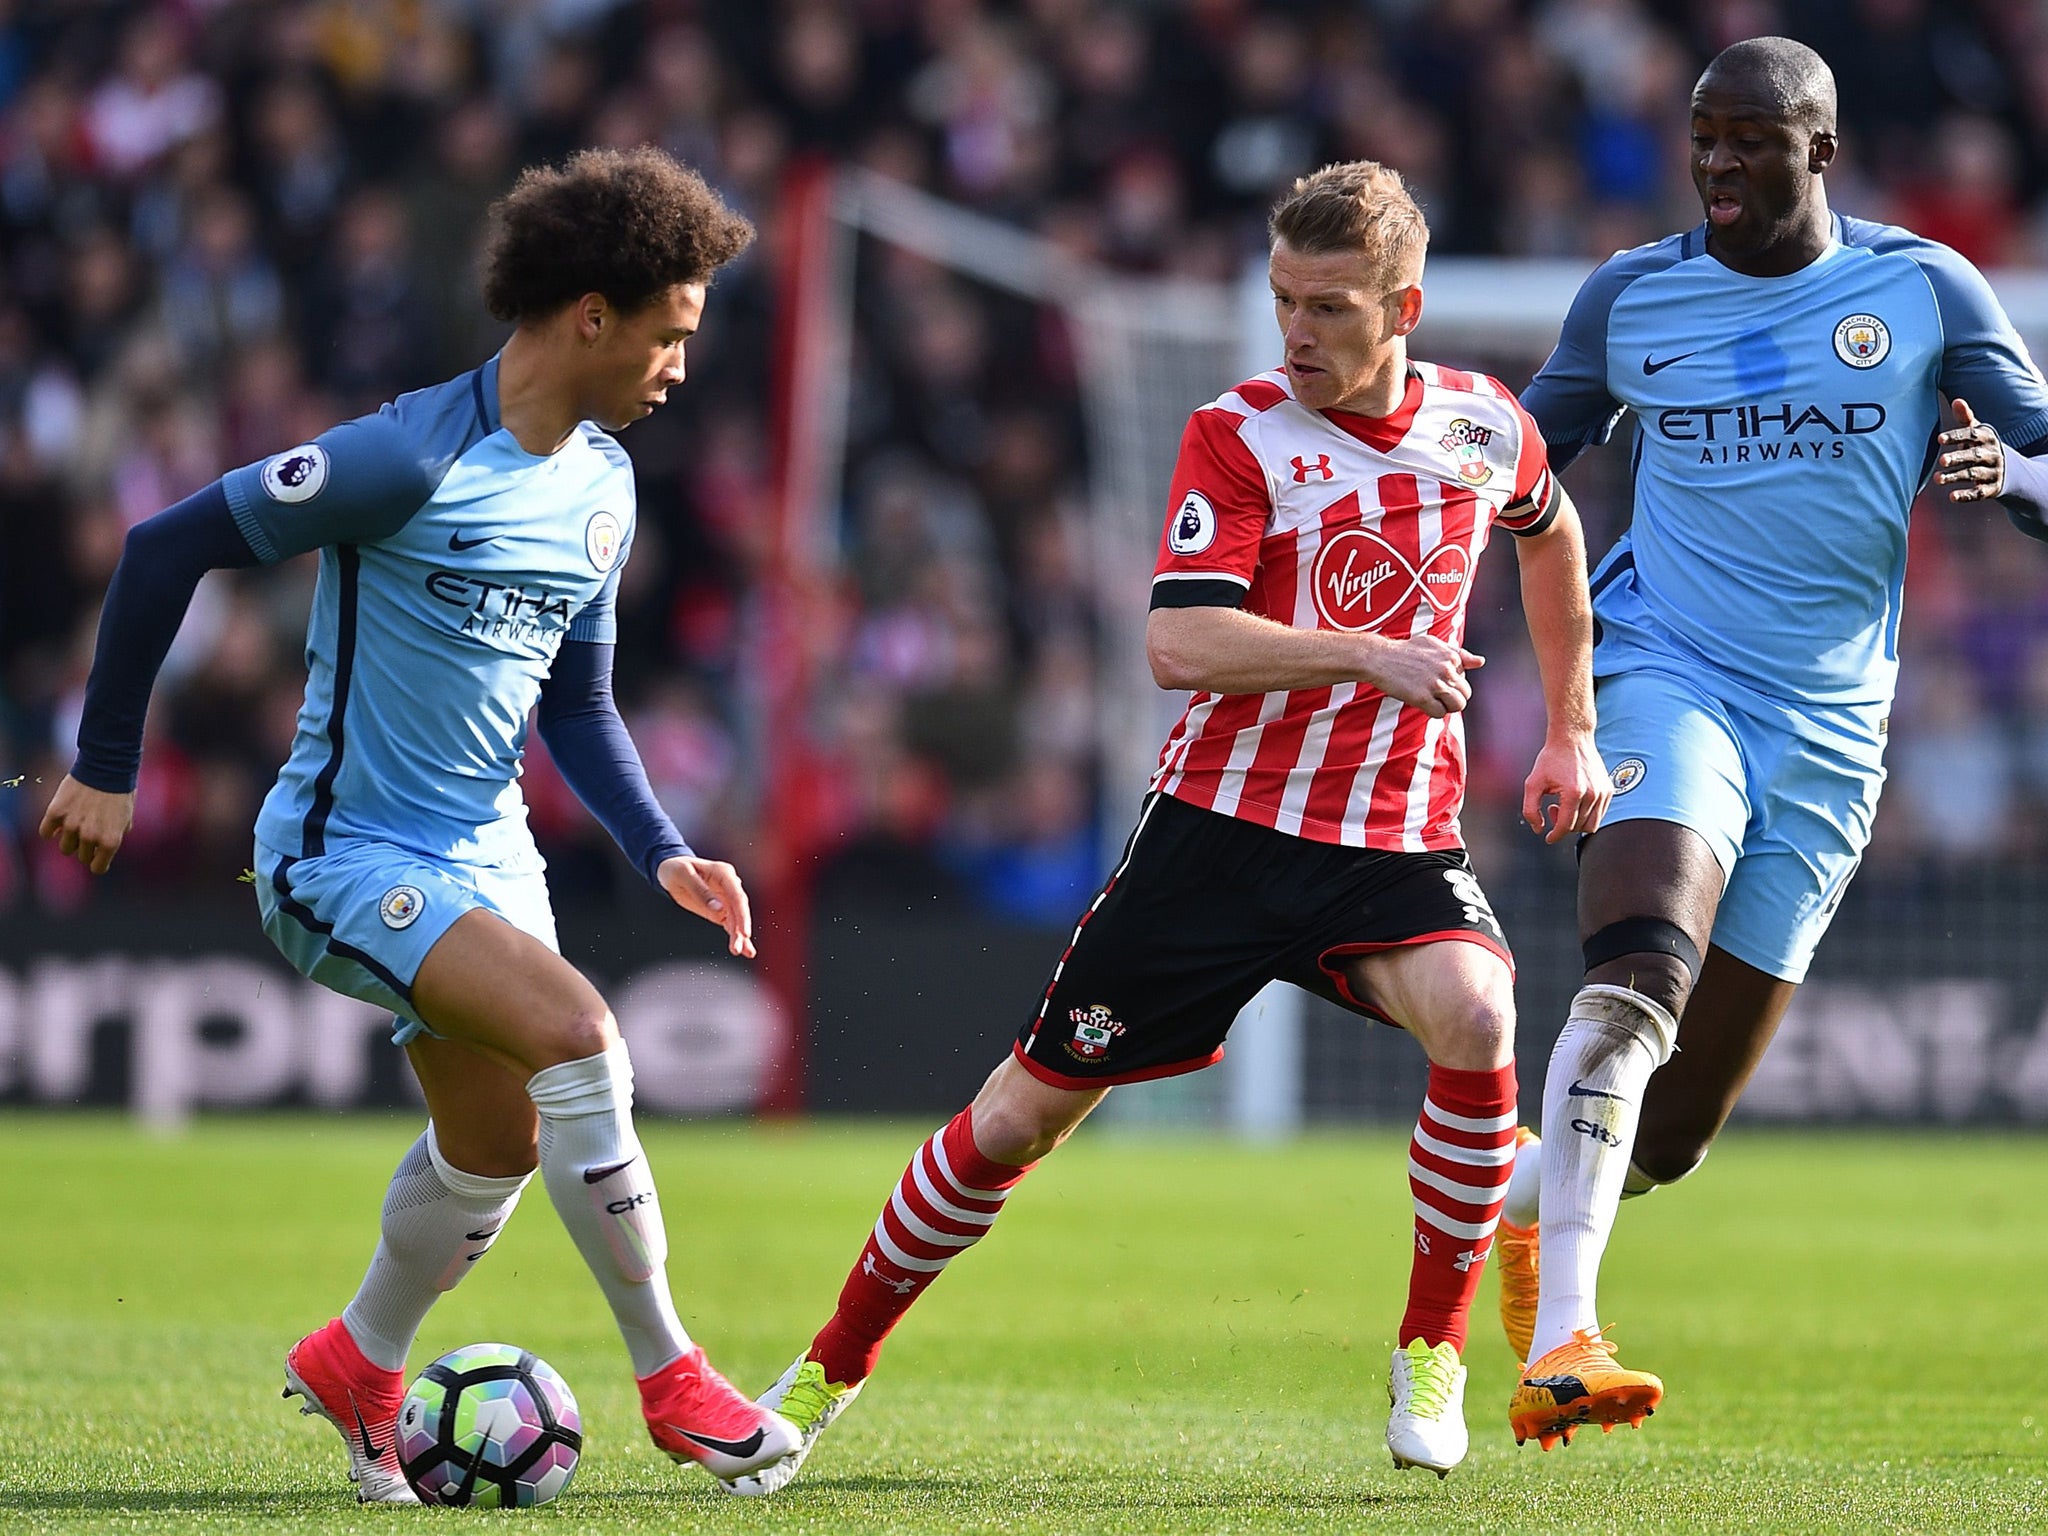 Southampton held Manchester City to a draw earlier this season